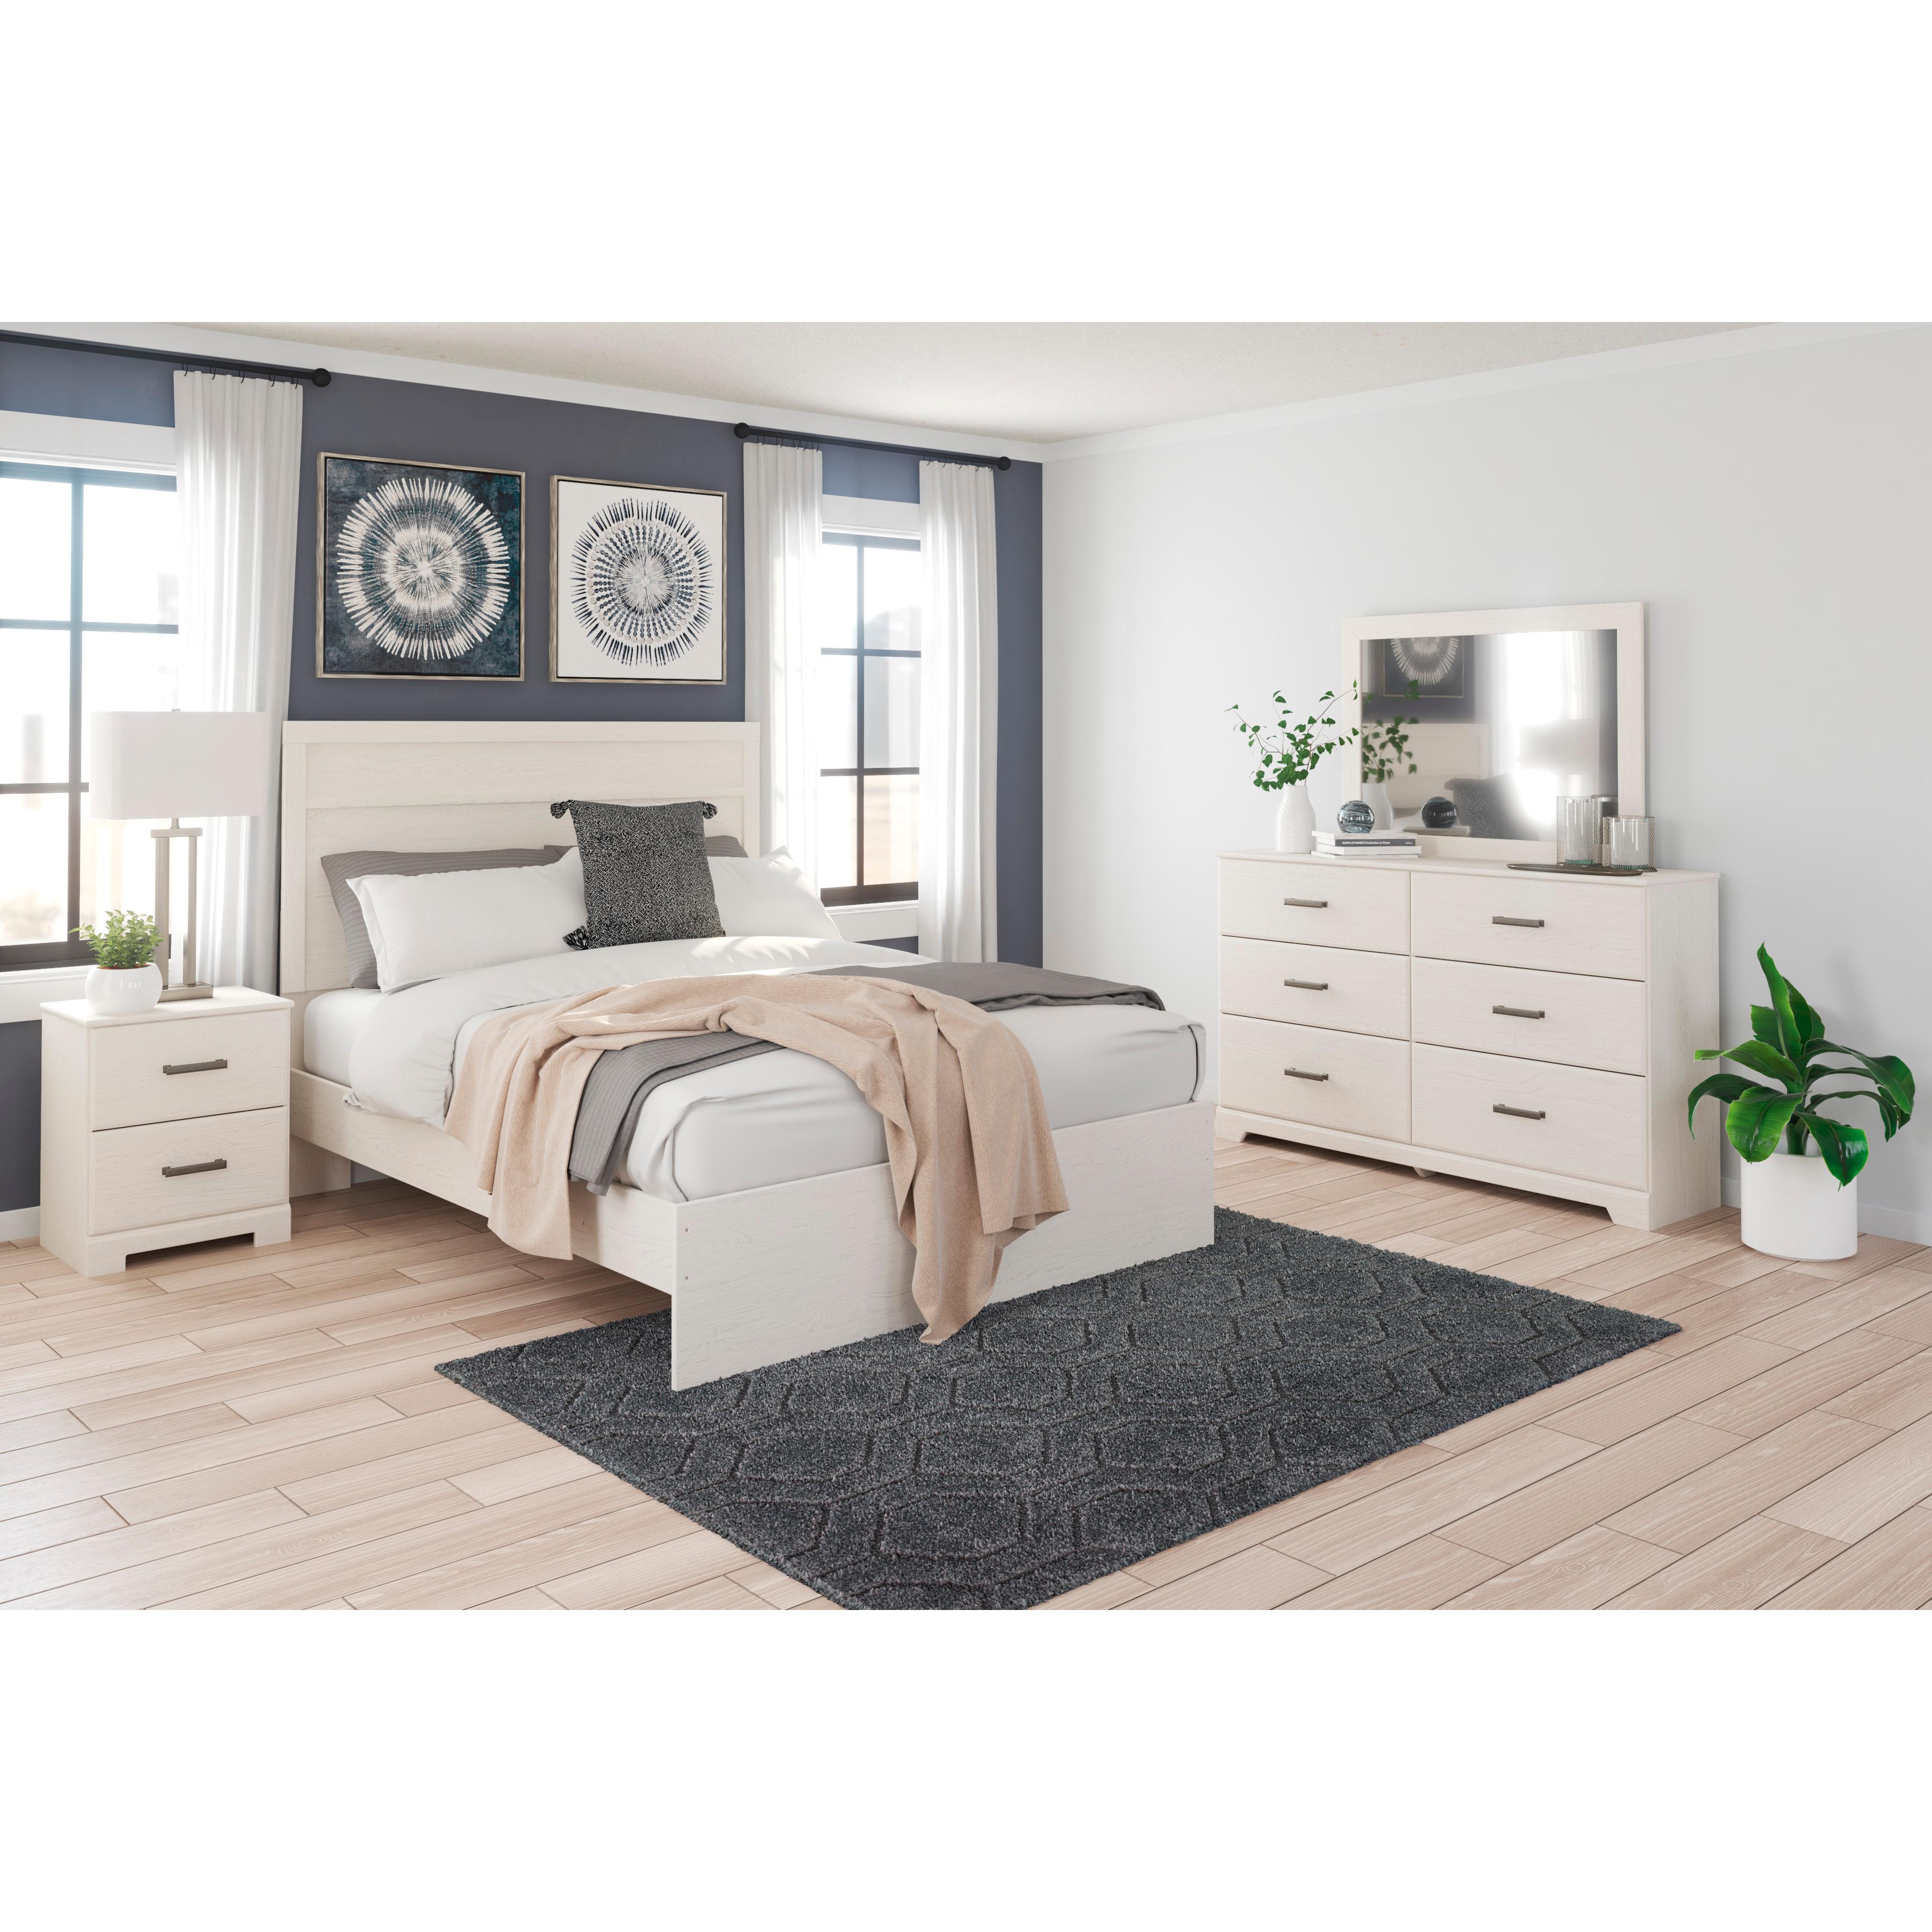 Signature Design by Ashley Stelsie Queen Panel Bed B2588-71/B2588-96